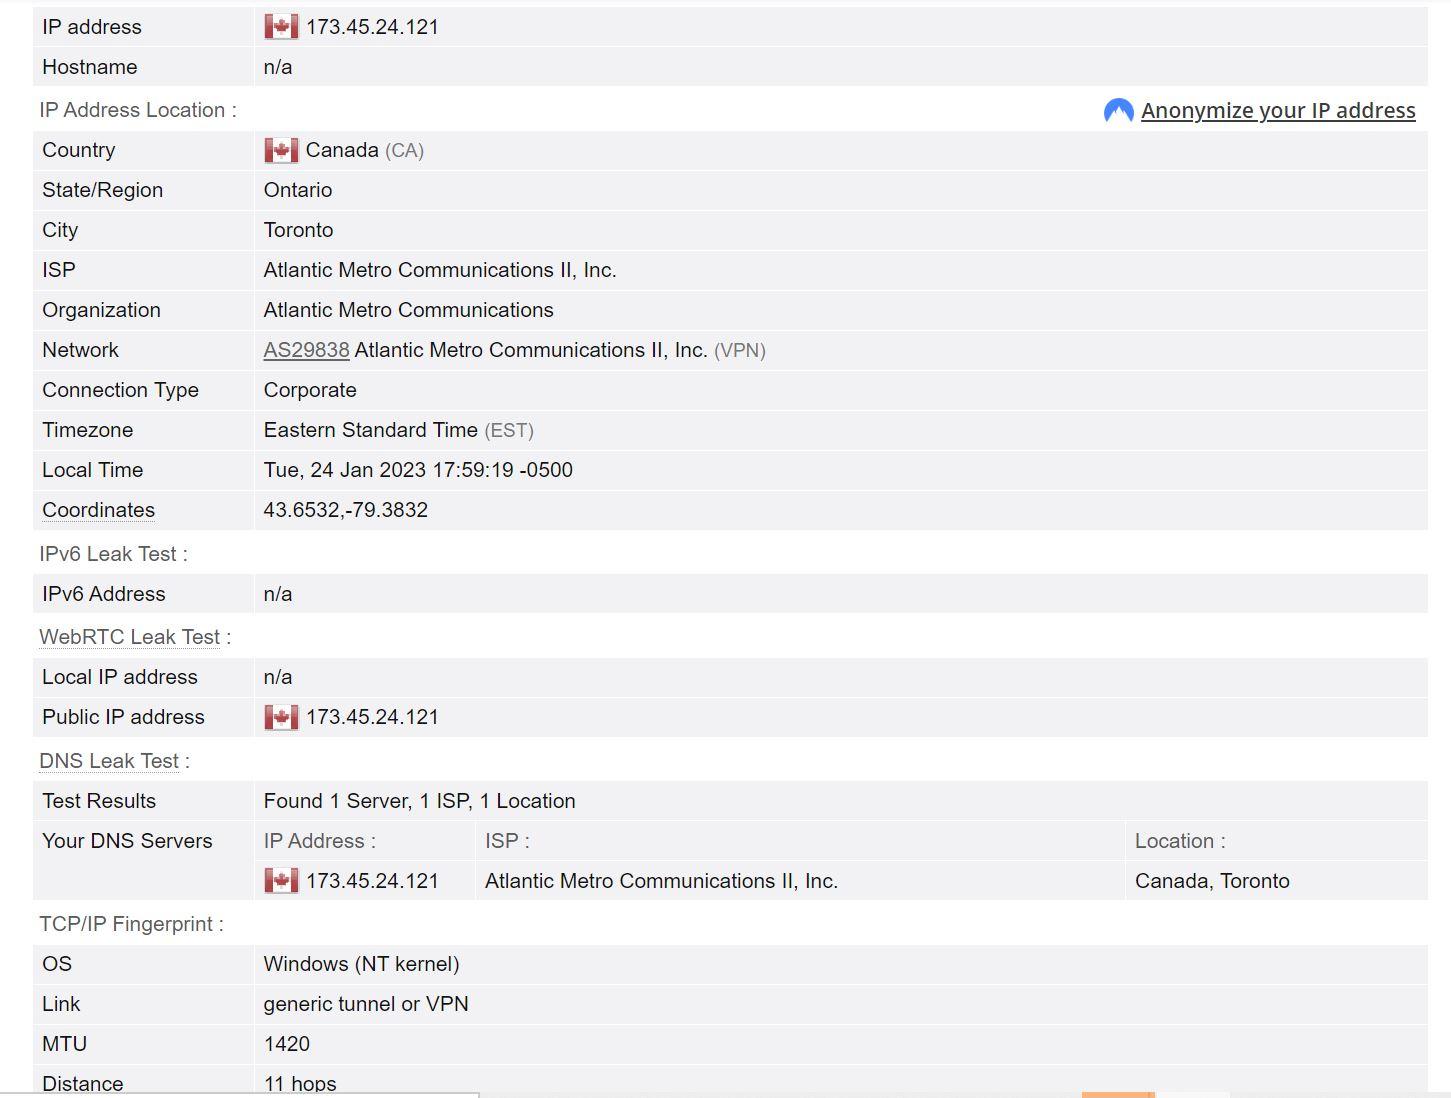 DNS leak test results for TunnelBear VPN from U.S. to Canadian servers.